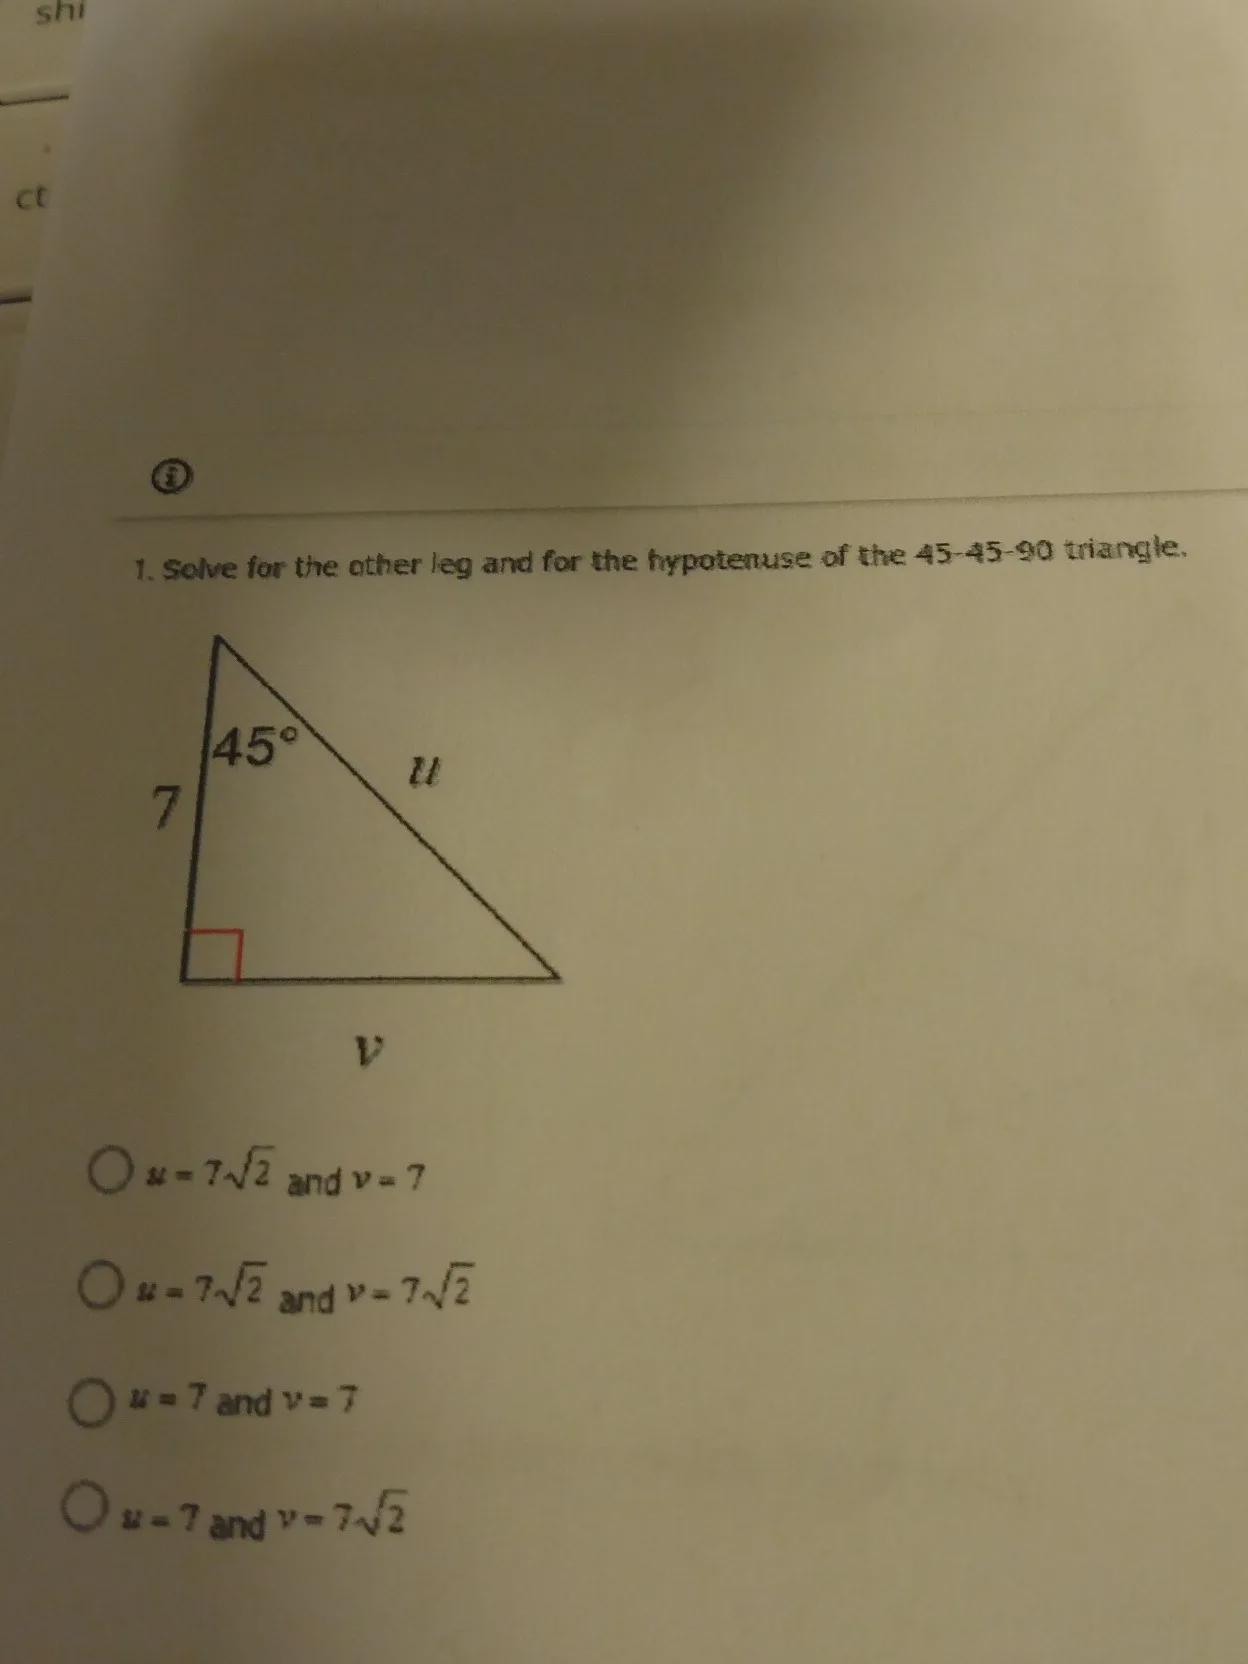 It Wants Me To Solve For The Other Leg And For The Hypotenuse Of The 45-45-90 Triangle